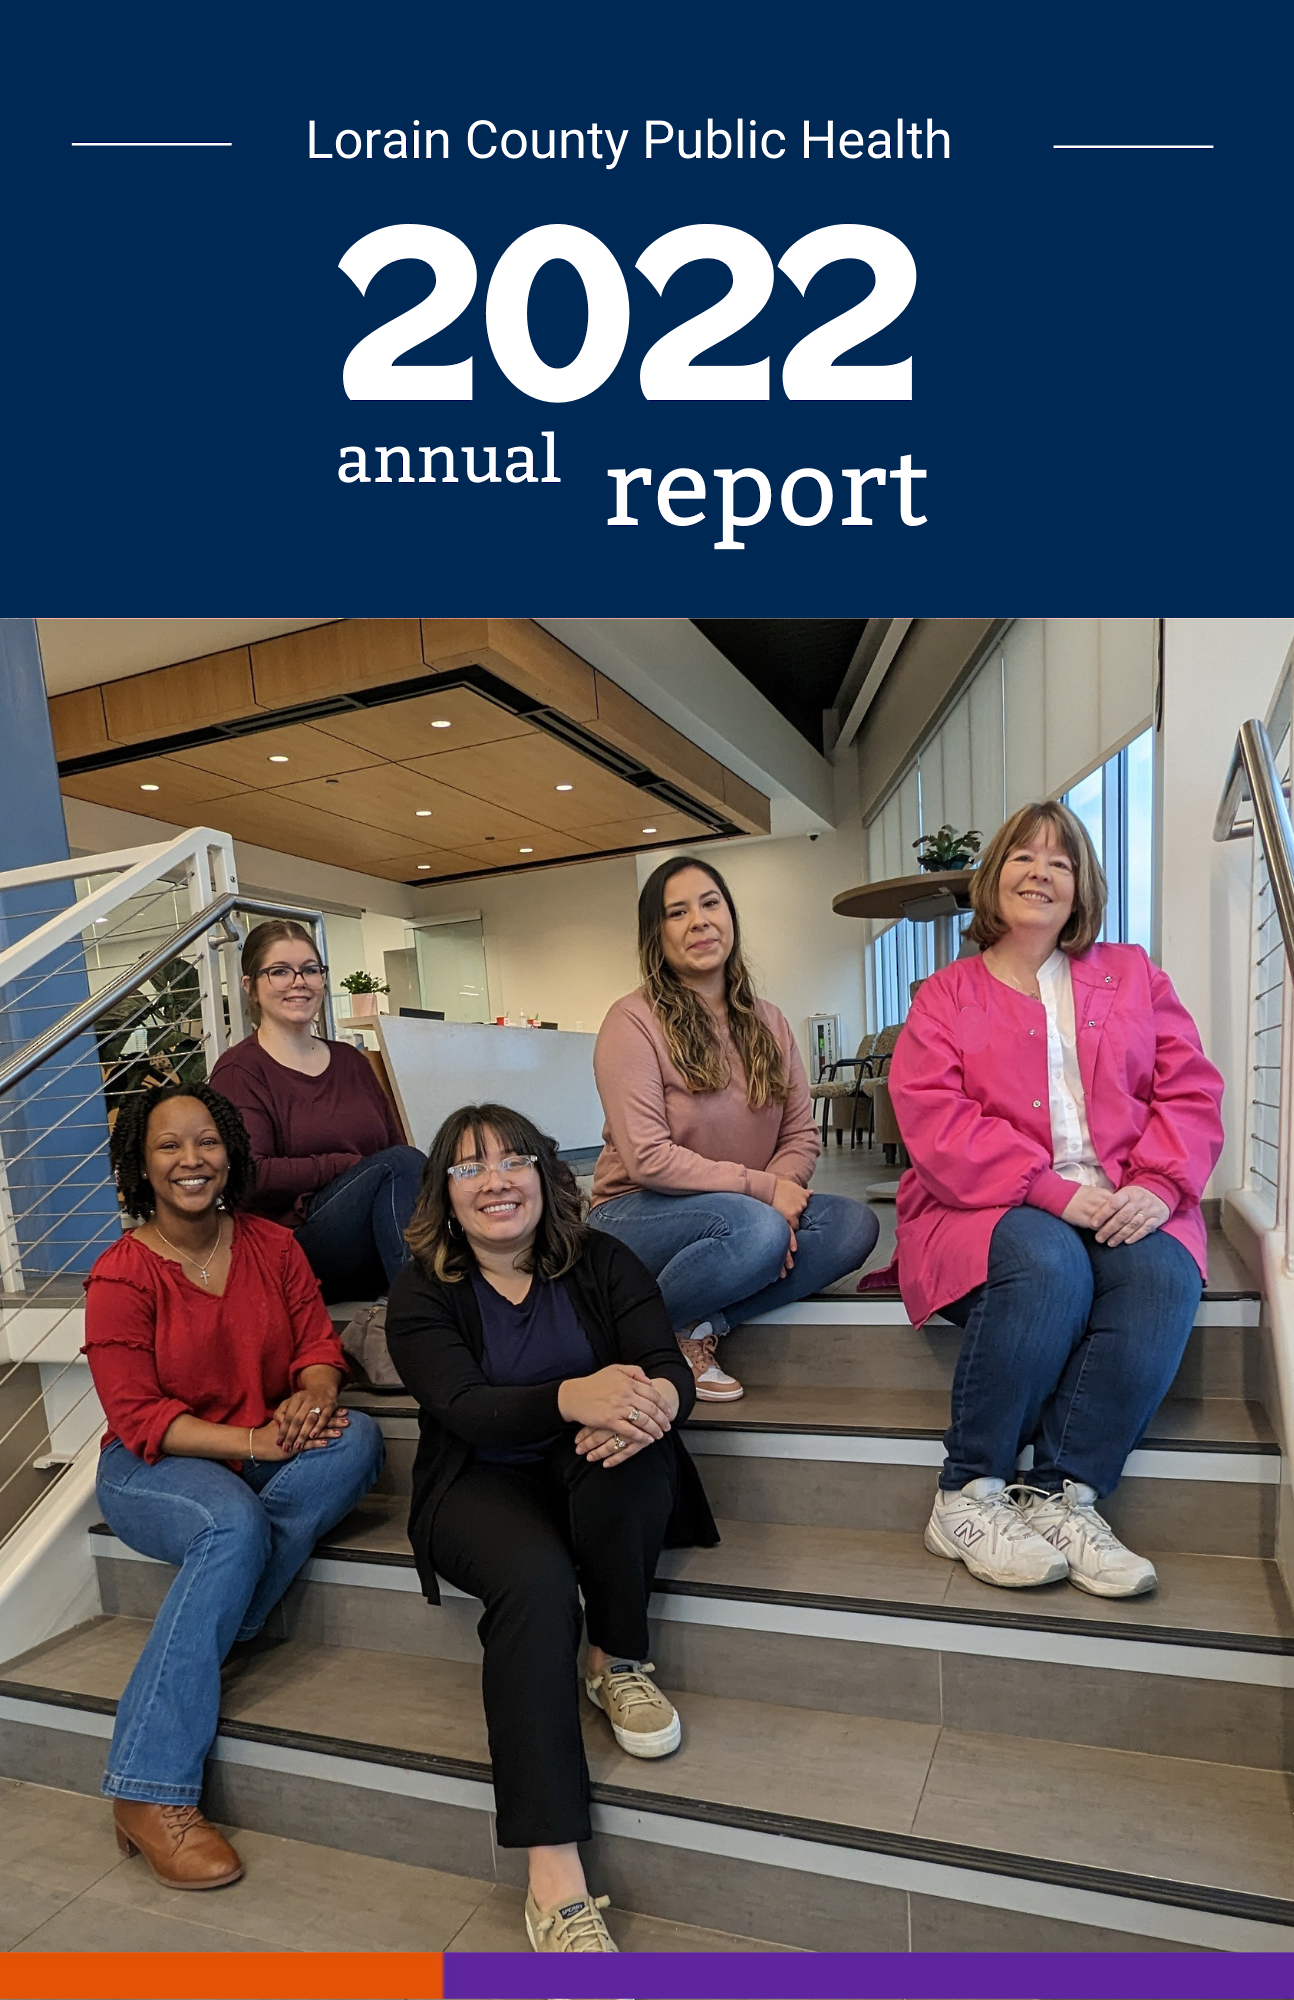 The words "Lorain County Public Health annual report" with five women sitting on some stairs